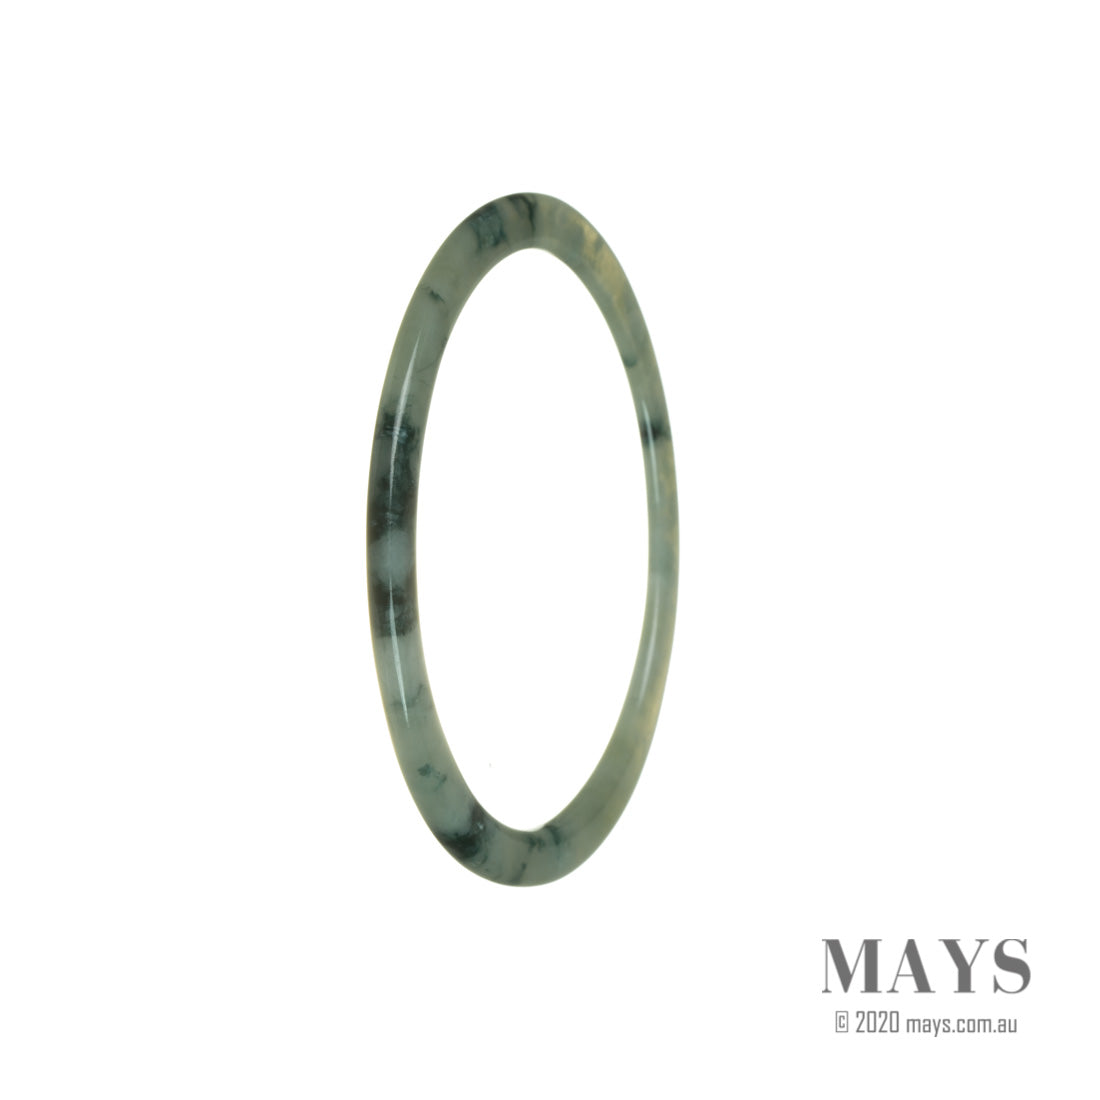 A close-up photo of a beautiful, light green jade bangle bracelet. The bracelet is thin and has a smooth, polished surface. It is made of genuine Type A Flower Burmese jade and has a diameter of 59mm. The jade has a delicate, translucent appearance, reflecting light and highlighting its natural patterns. A luxurious and elegant piece of jewelry by MAYS™.